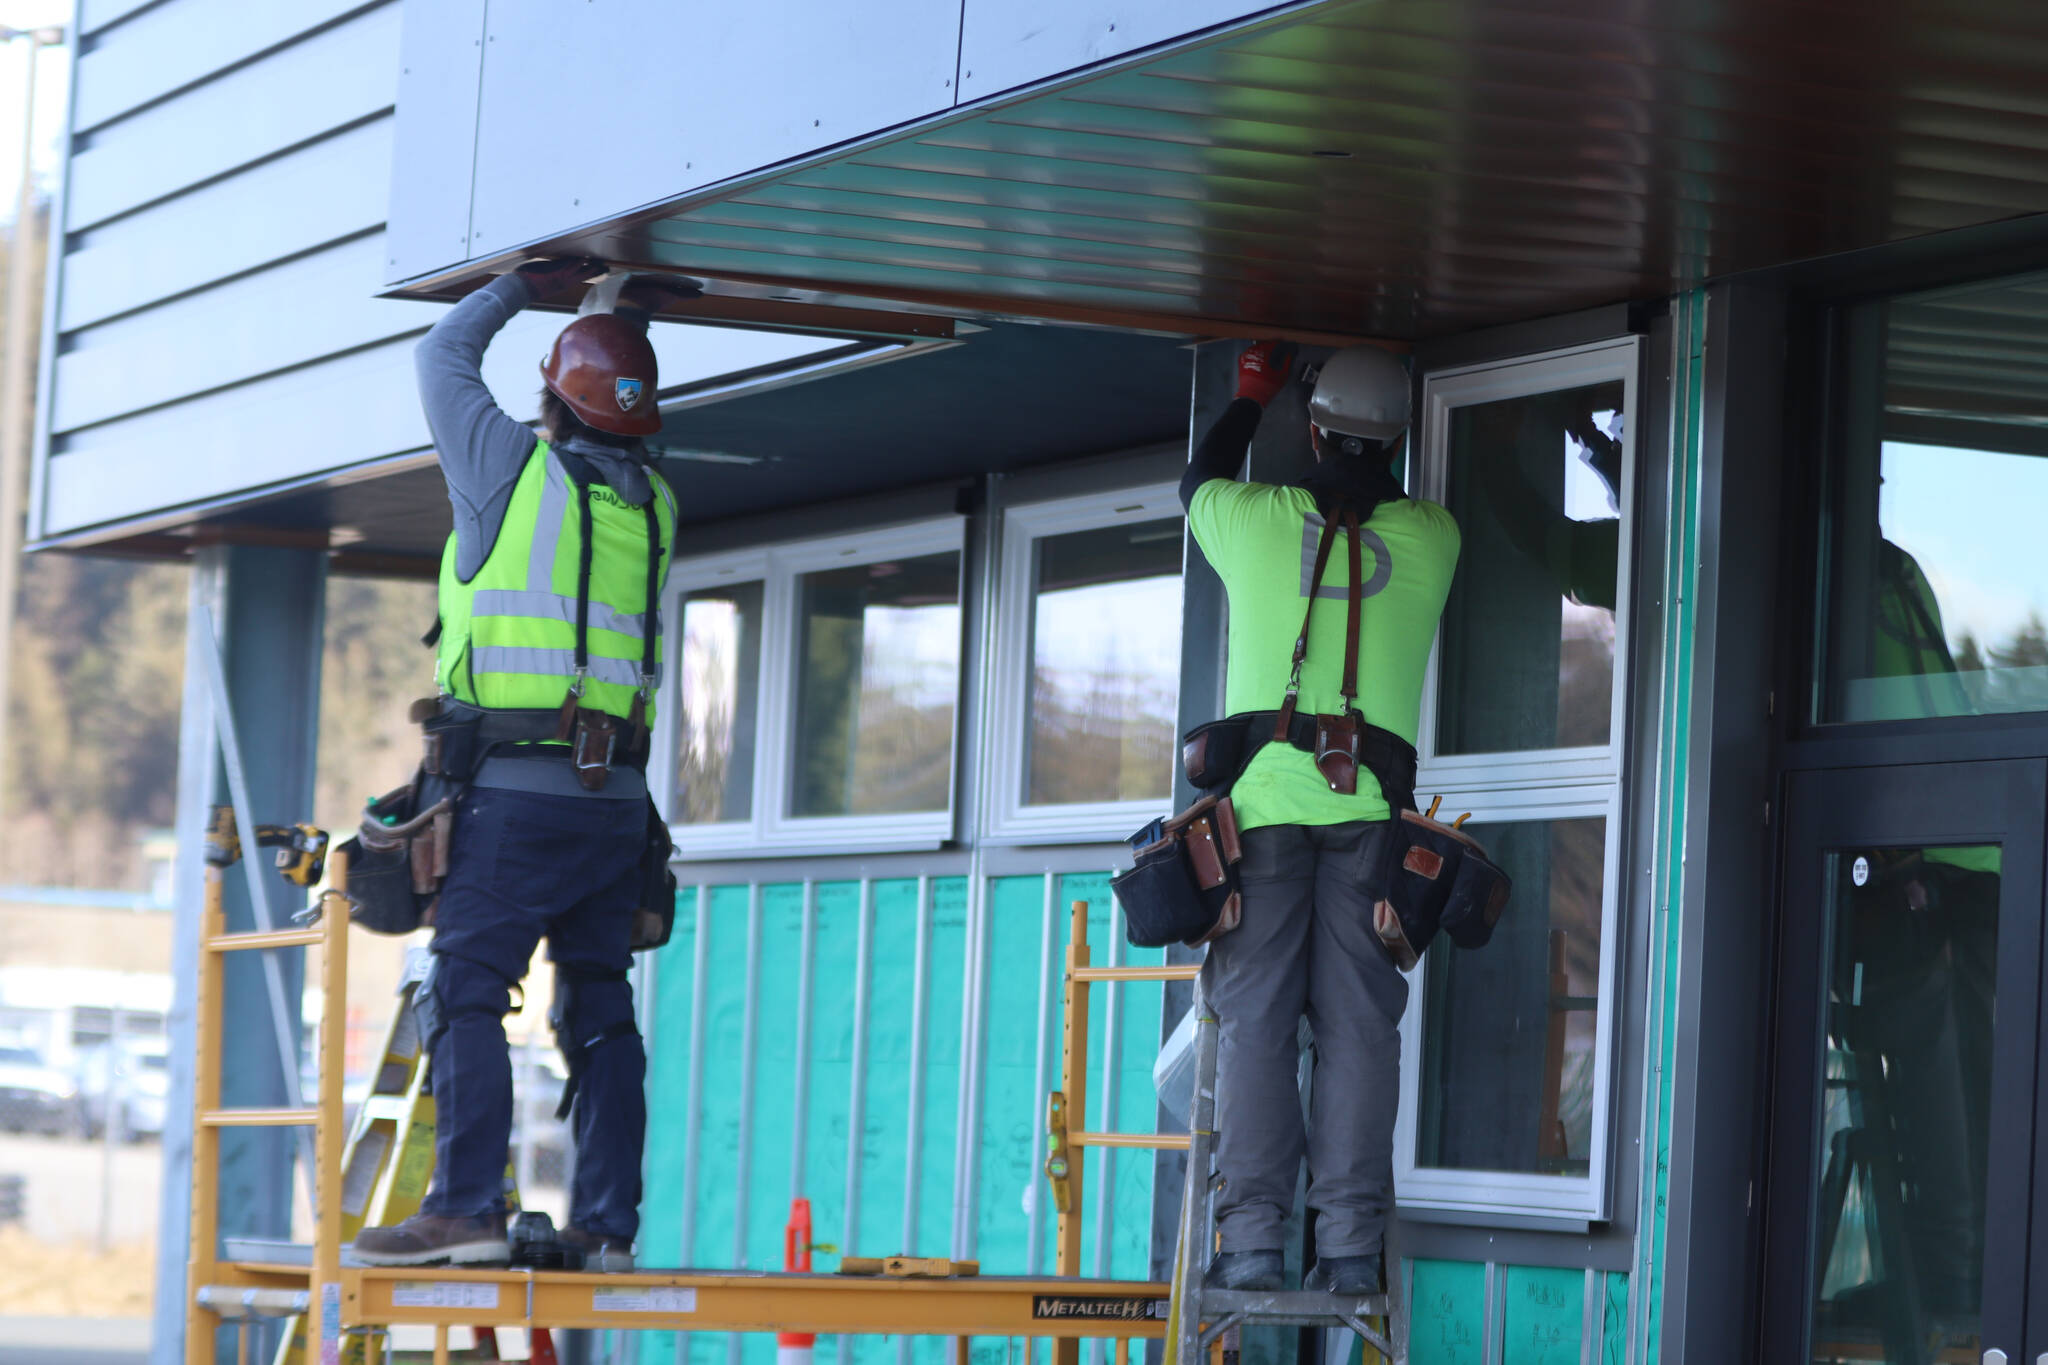 Construction crews perform remaining exterior work left on the Teal Street Center, which is tentatively scheduled to be wrapped up by the end of the summer. While minor exterior construction remains, offices are open to the public to provide services. (Jonson Kuhn / Juneau Empire)